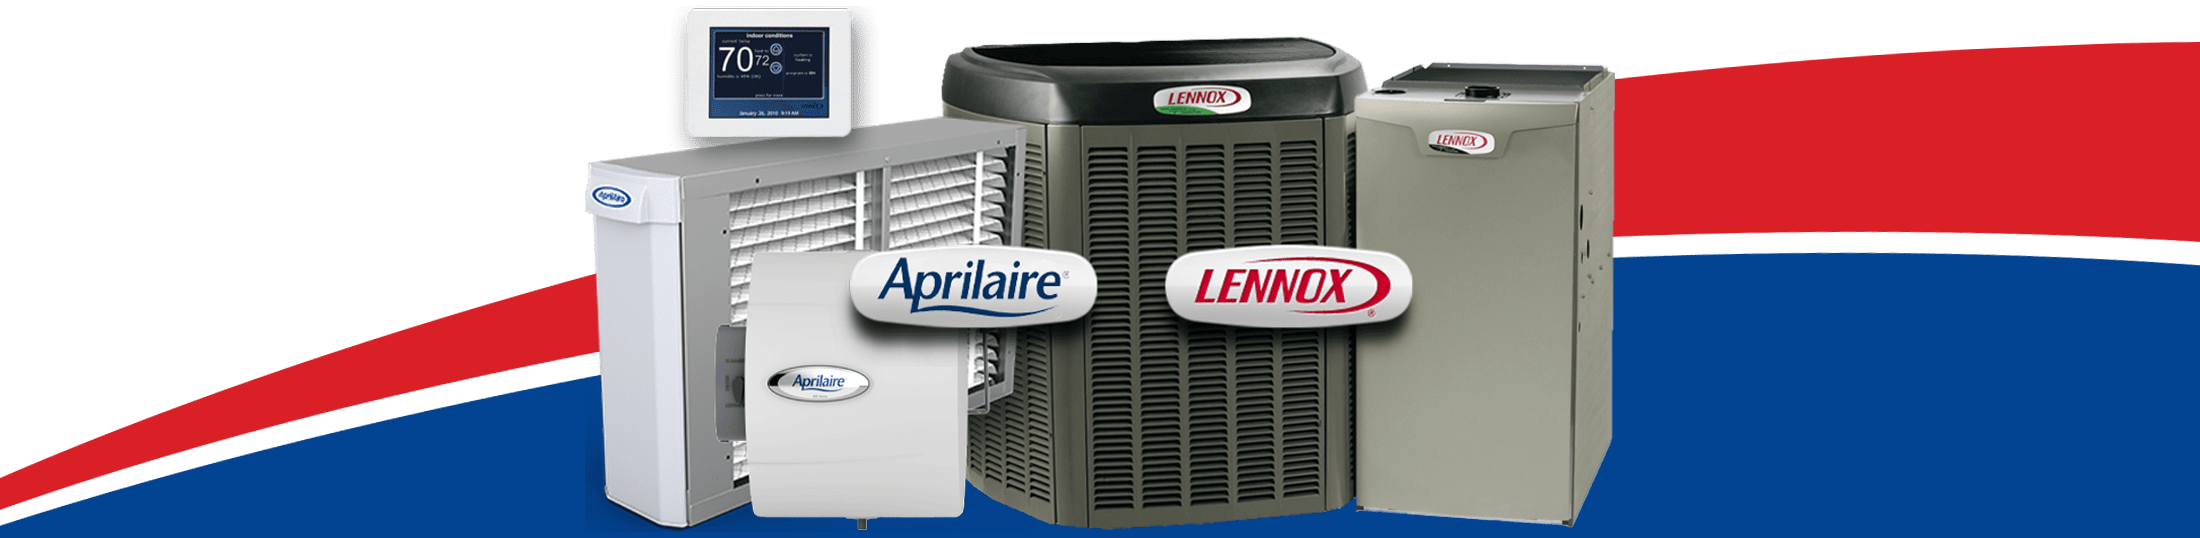 Accu-Temp Heating & Air Conditioning works with Aprilaire & Lennox ACs in Brighton MI.